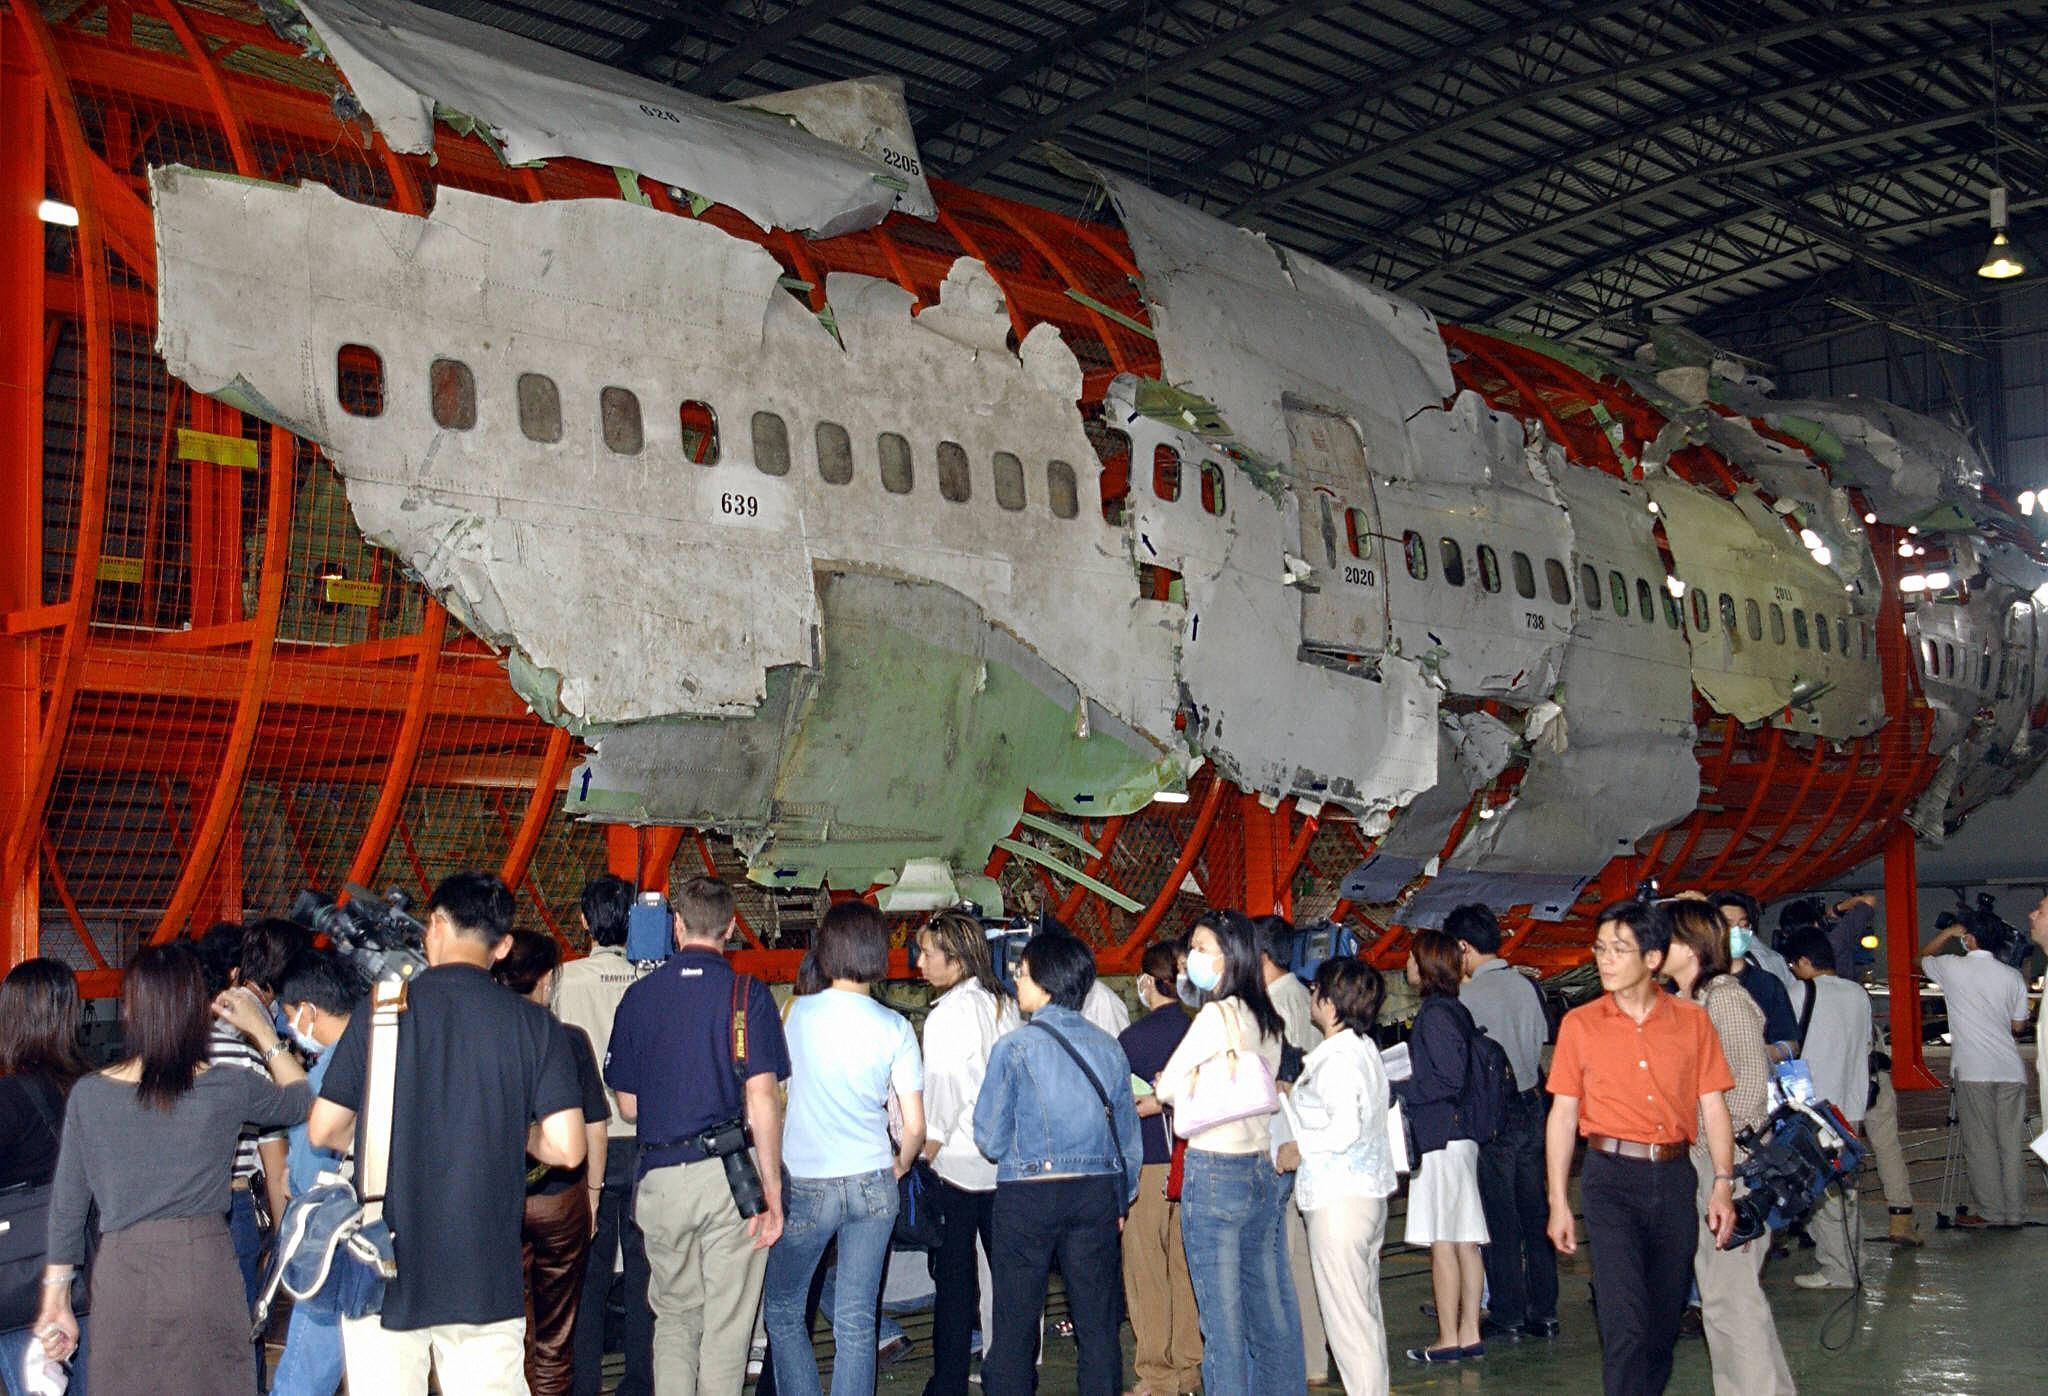 42 killed as plane overshoots runway in China · TheJournal.ie